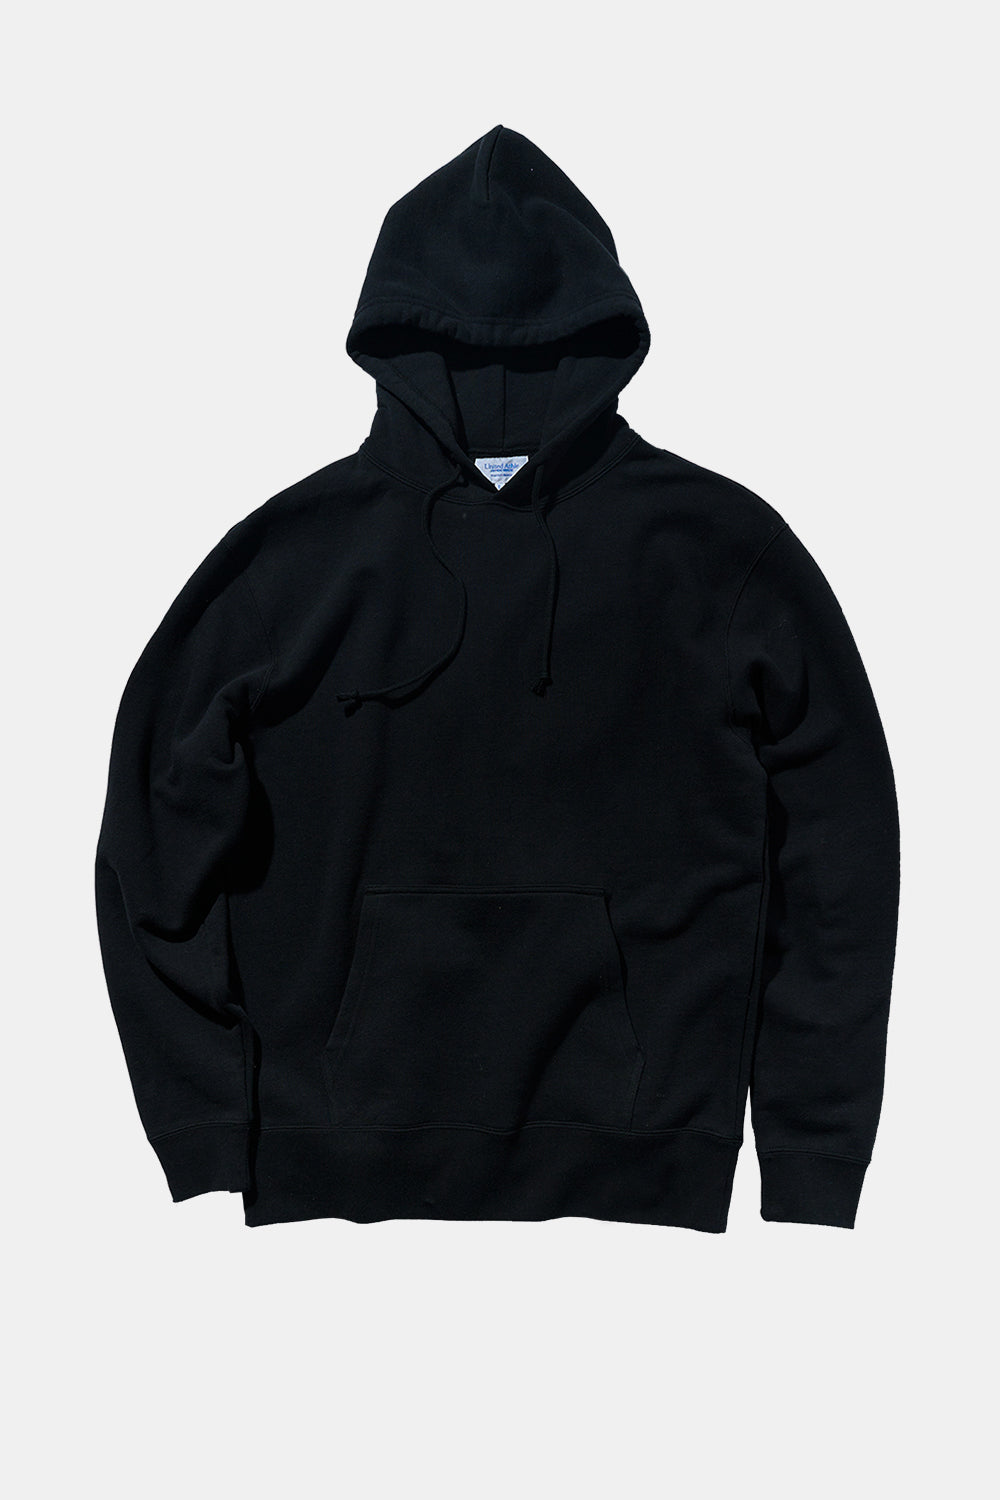 United Athle Japan Made Pull over Hoodie (Black)